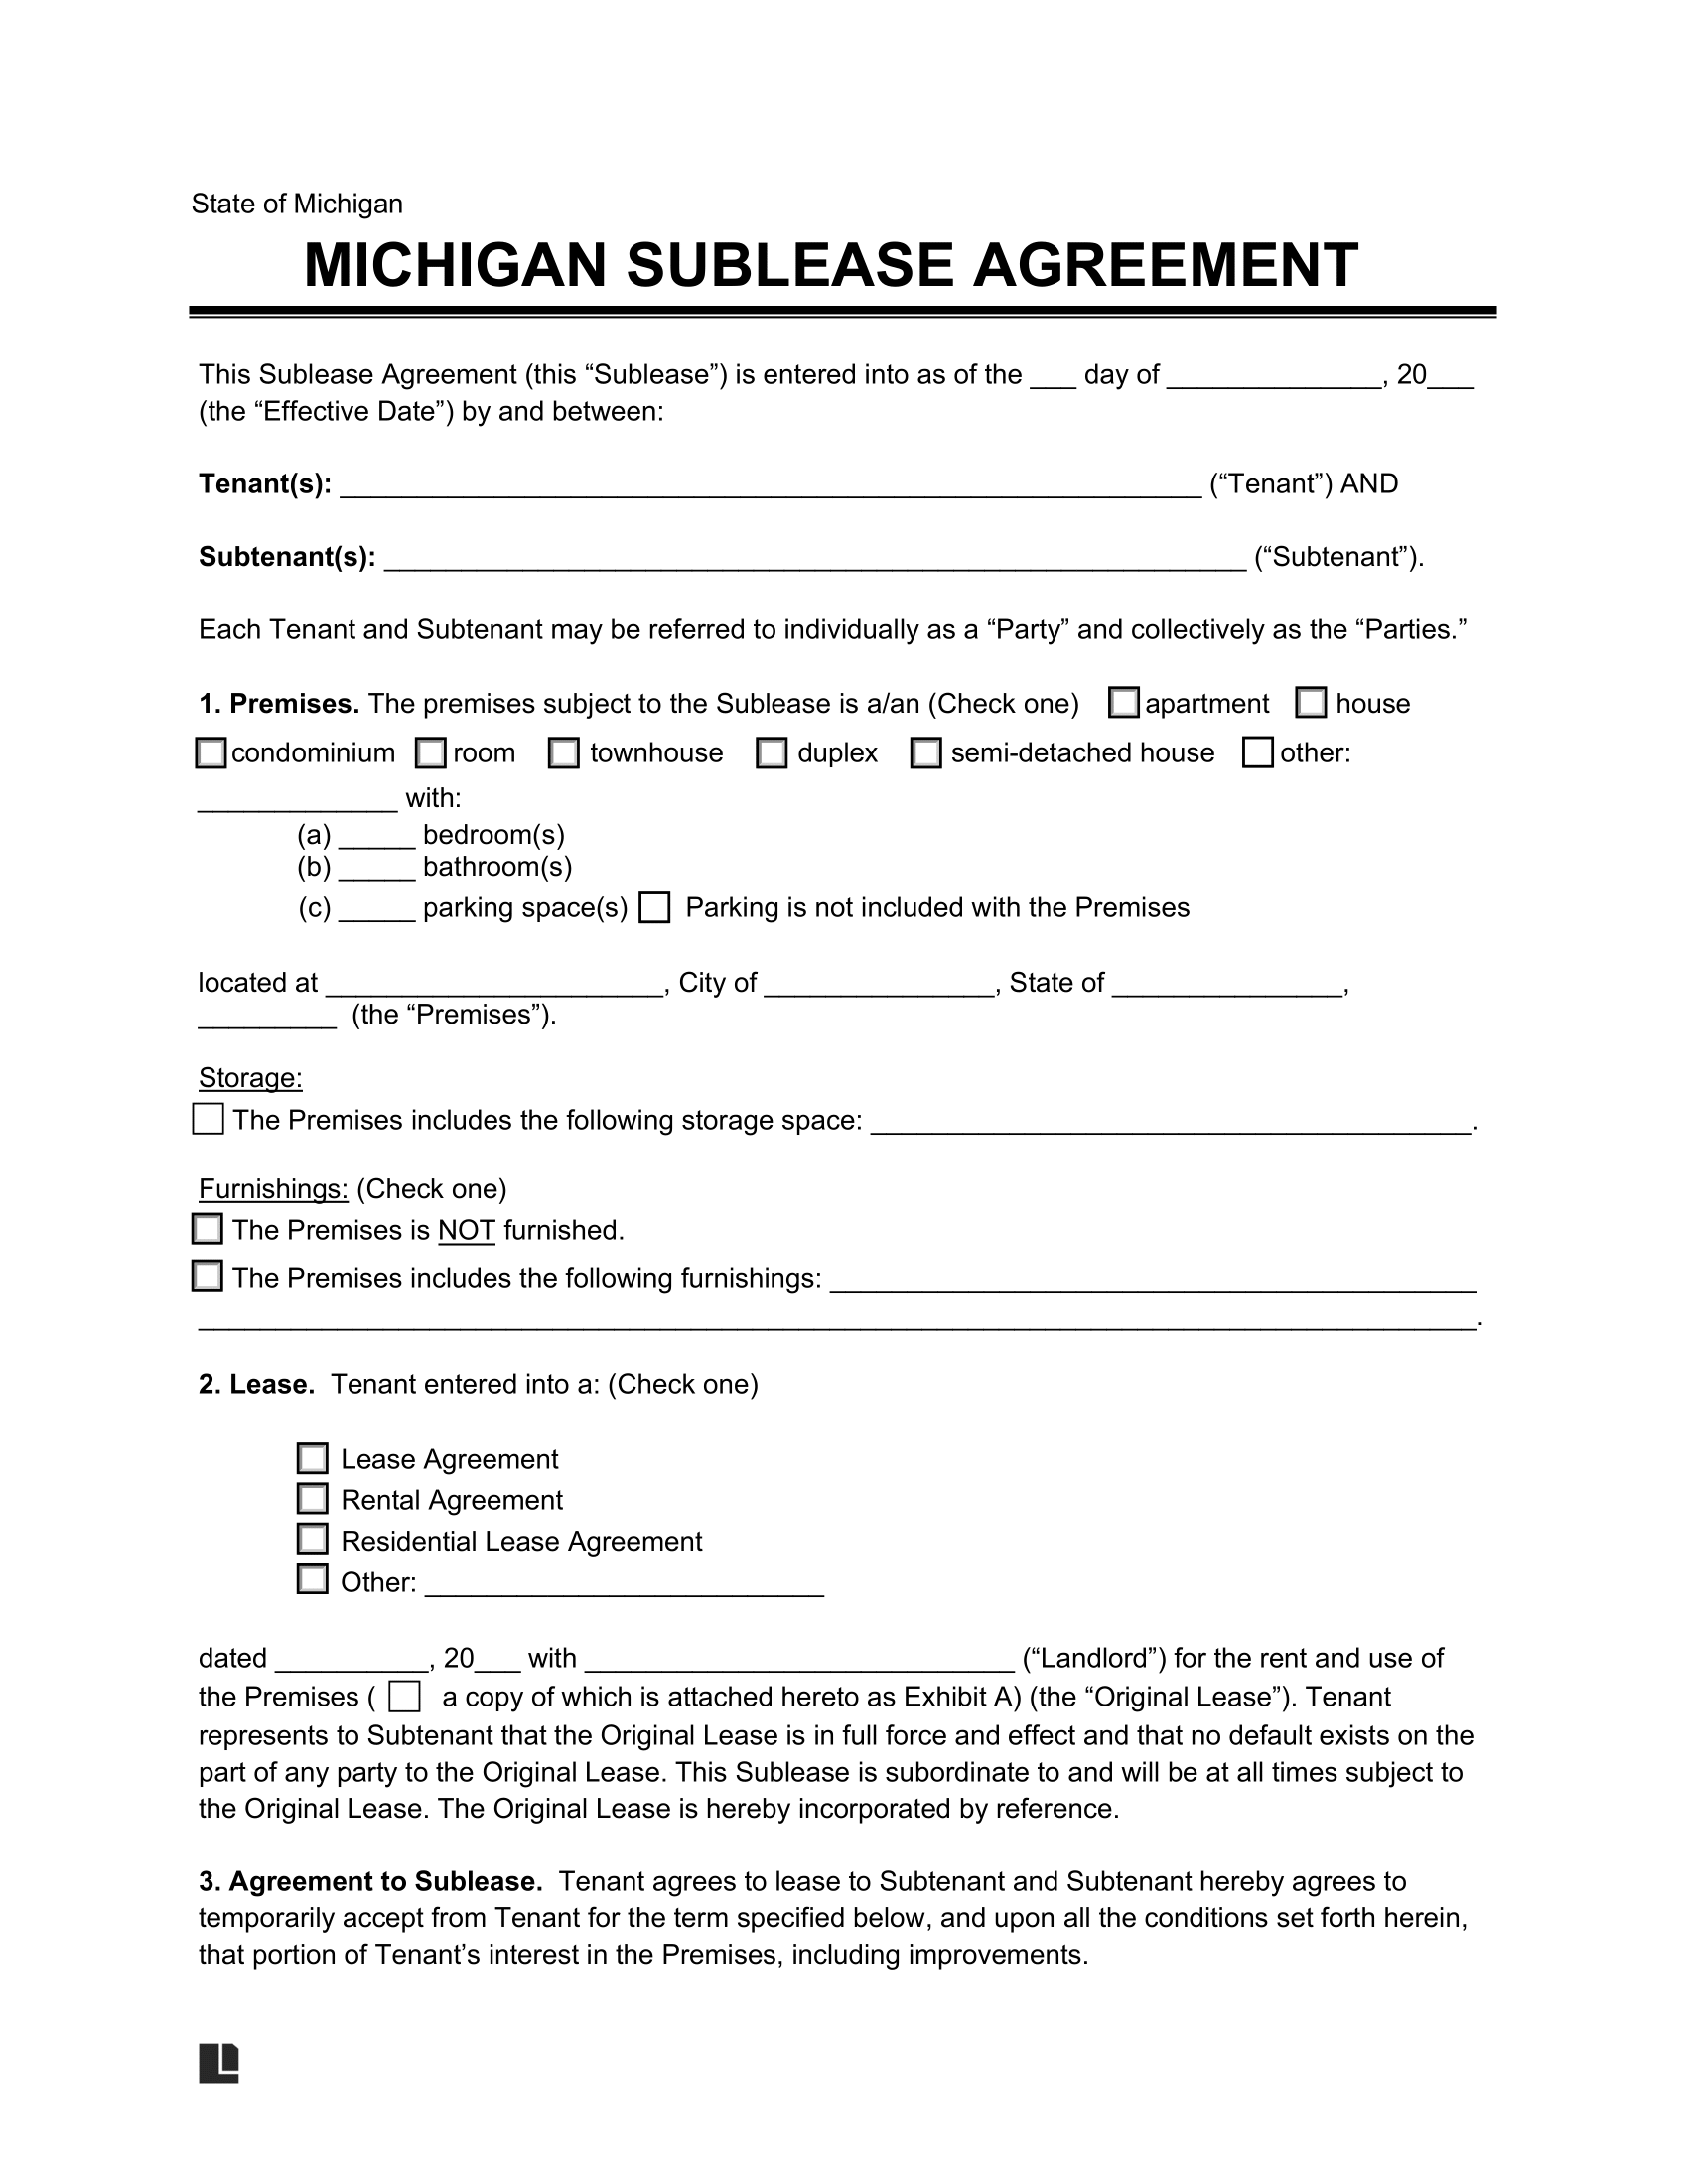 Michigan Sublease Agreement Template